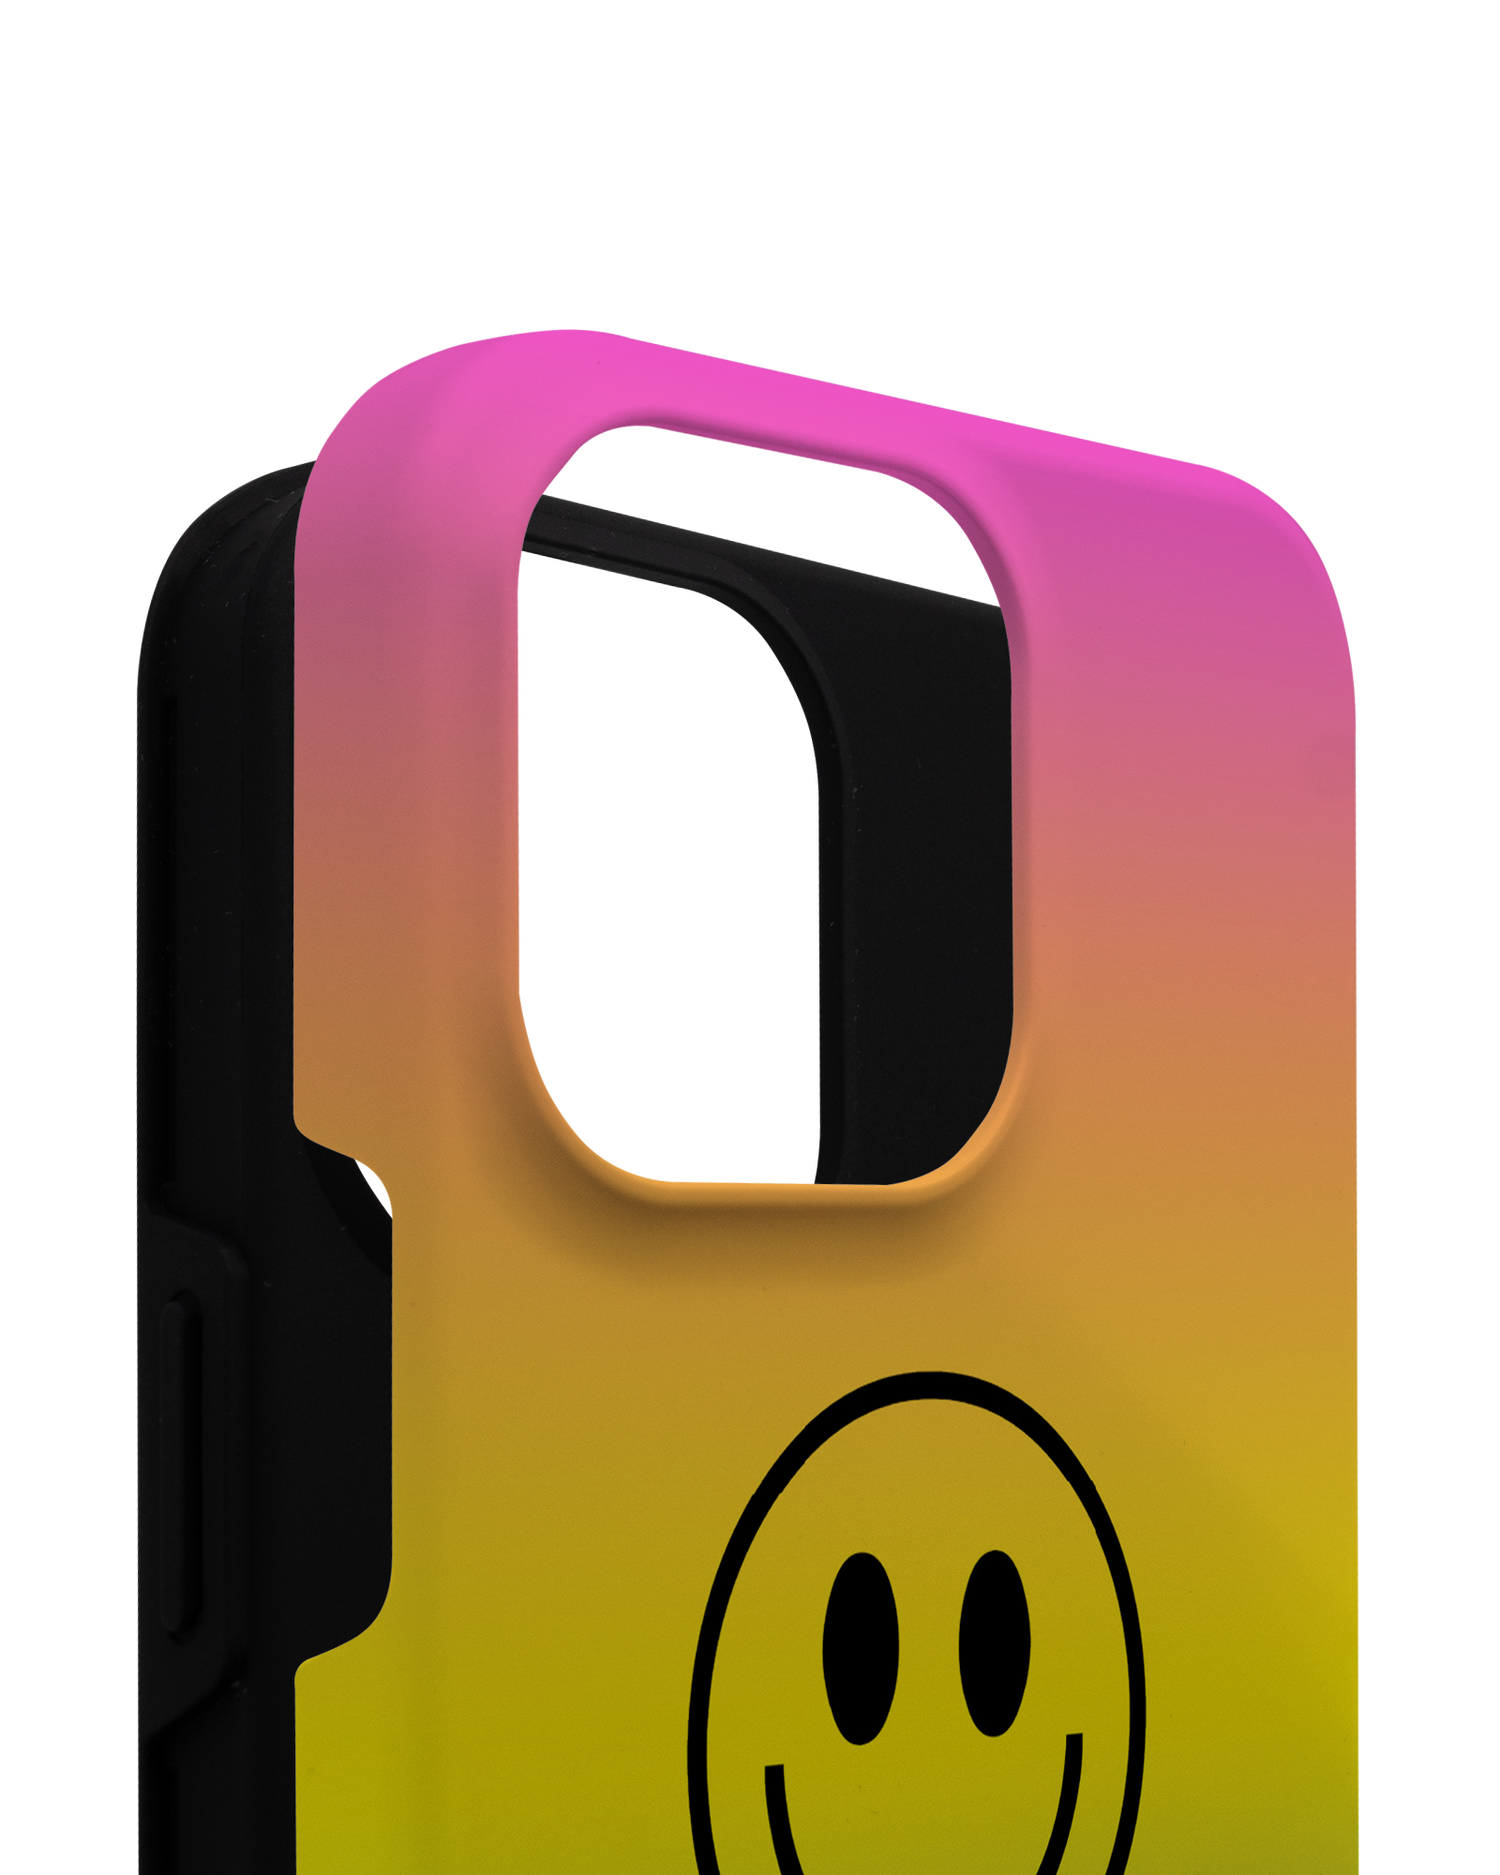 Have A Day Premium Phone Case for Apple iPhone 14 Pro Max consisting of 2 parts